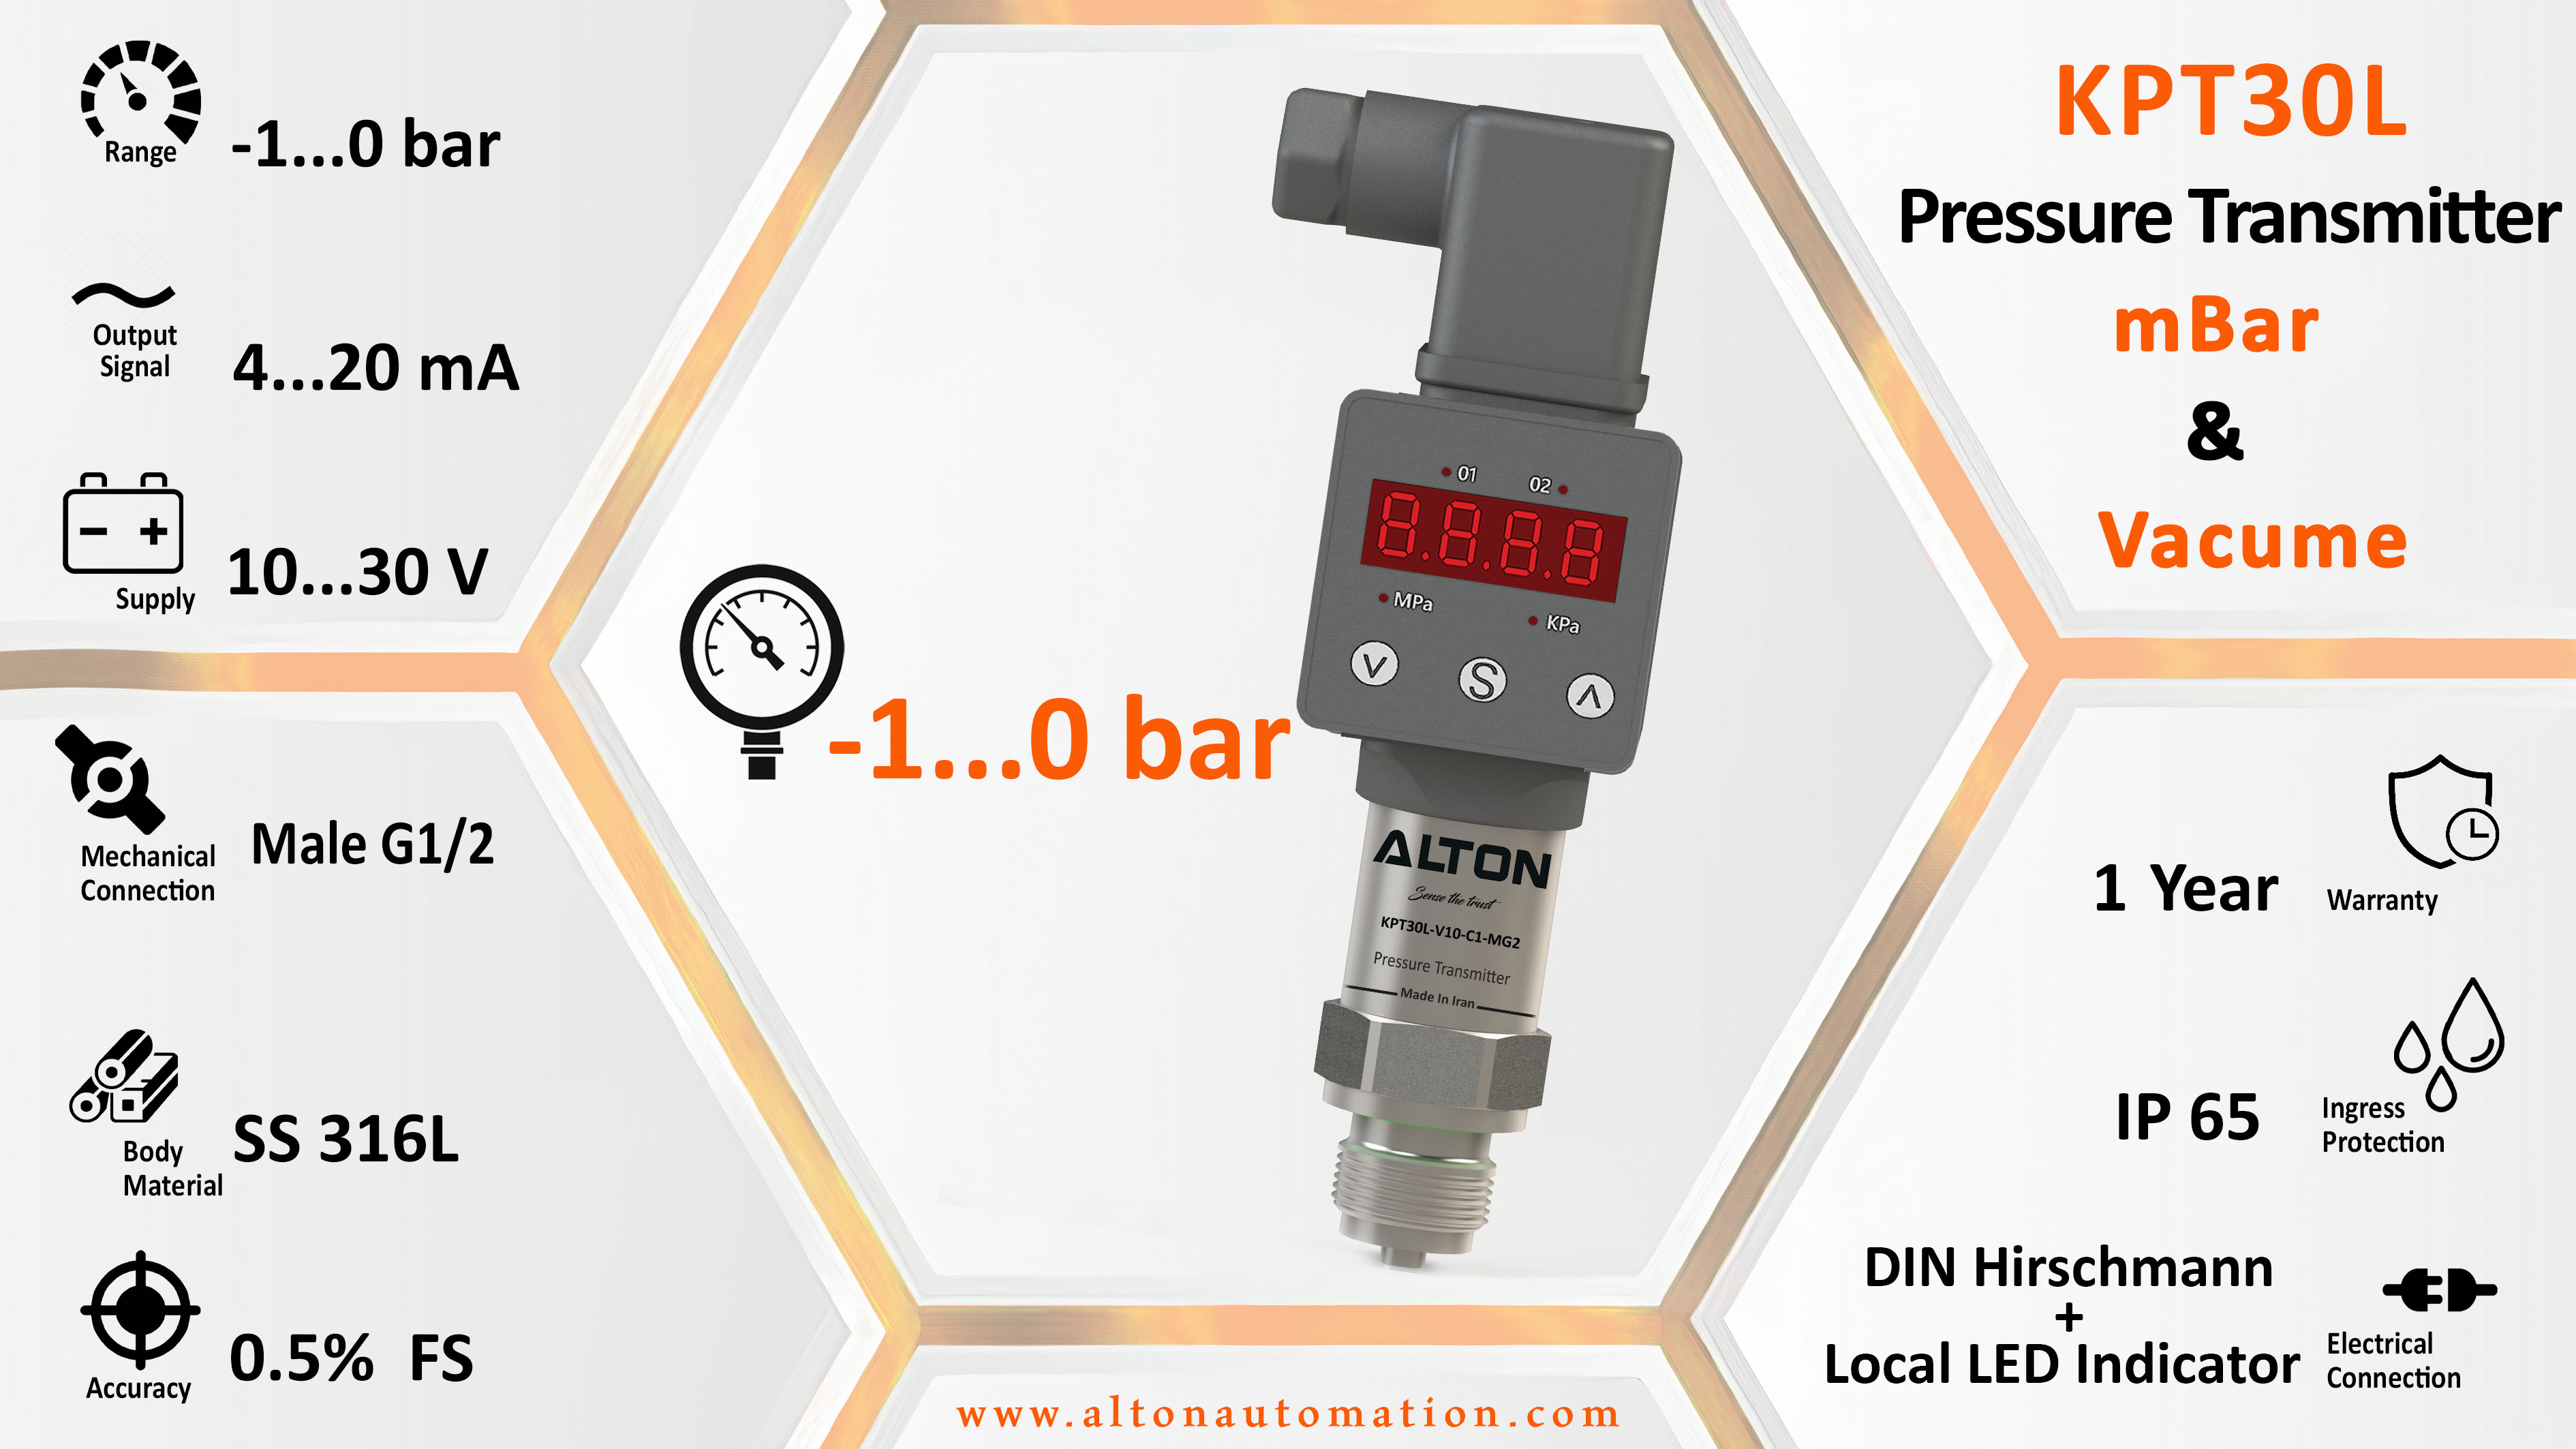 Pressure Transmitter for mbar and vacume-KPT30L-V10-C1-MG2